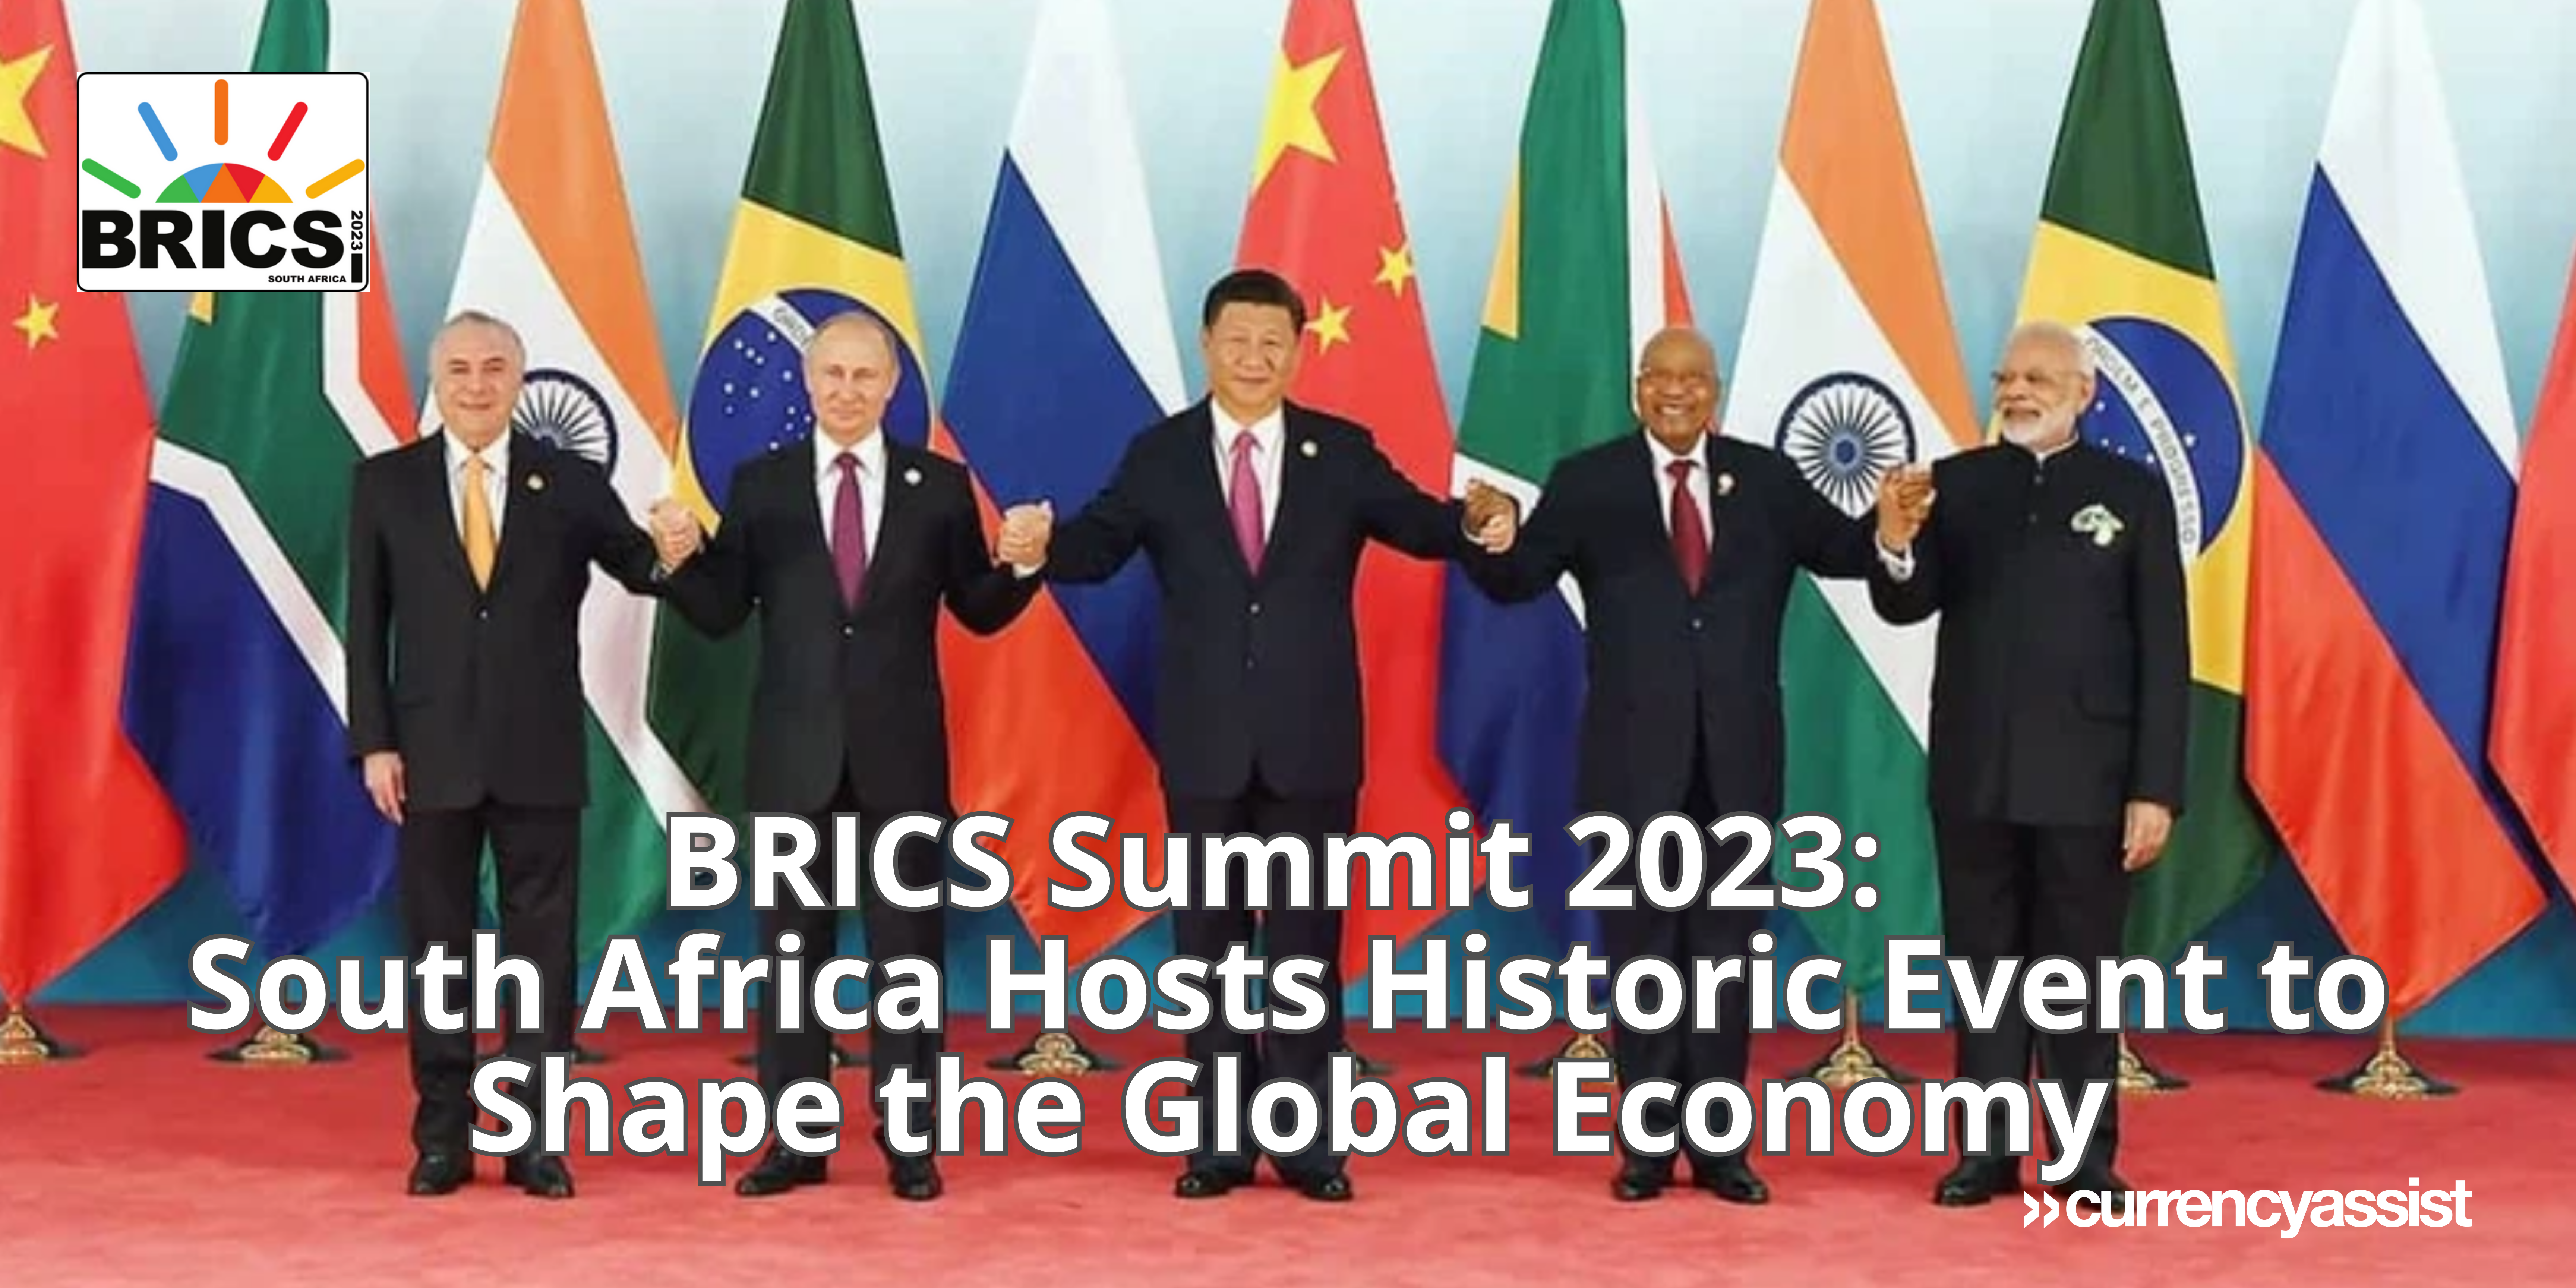 BRICS Summit 2023: South Africa Hosts Historic Event to Shape the Global Economy